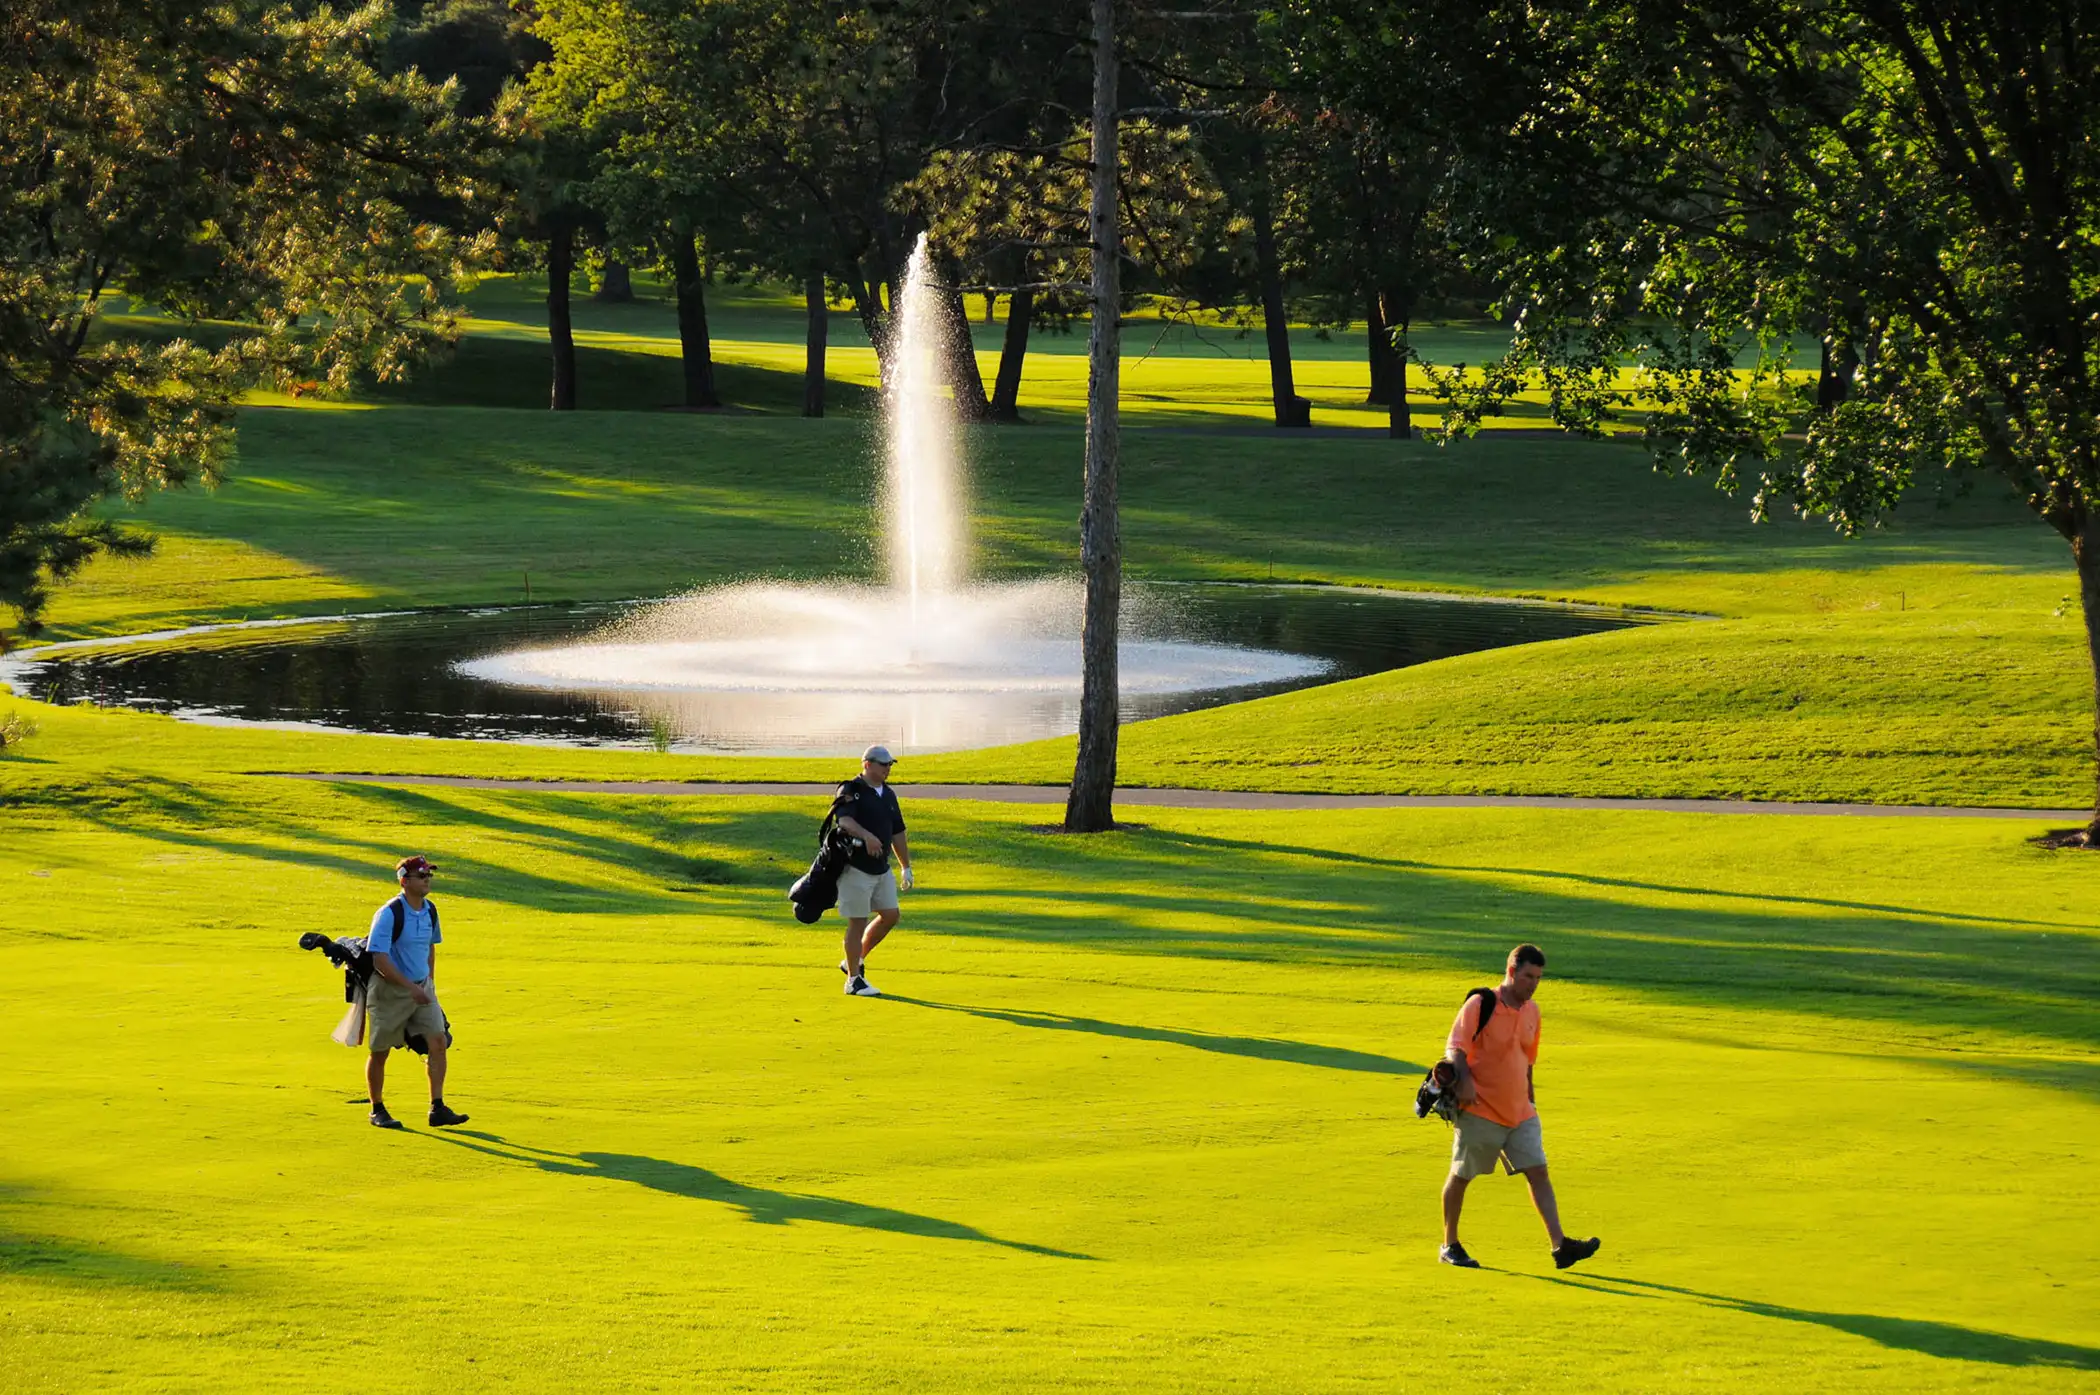 West Hartford, Connecticut. With two public golf courses, a skating rink, multiple pools, and America’s oldest public rose garden, there’s something for everyone here.